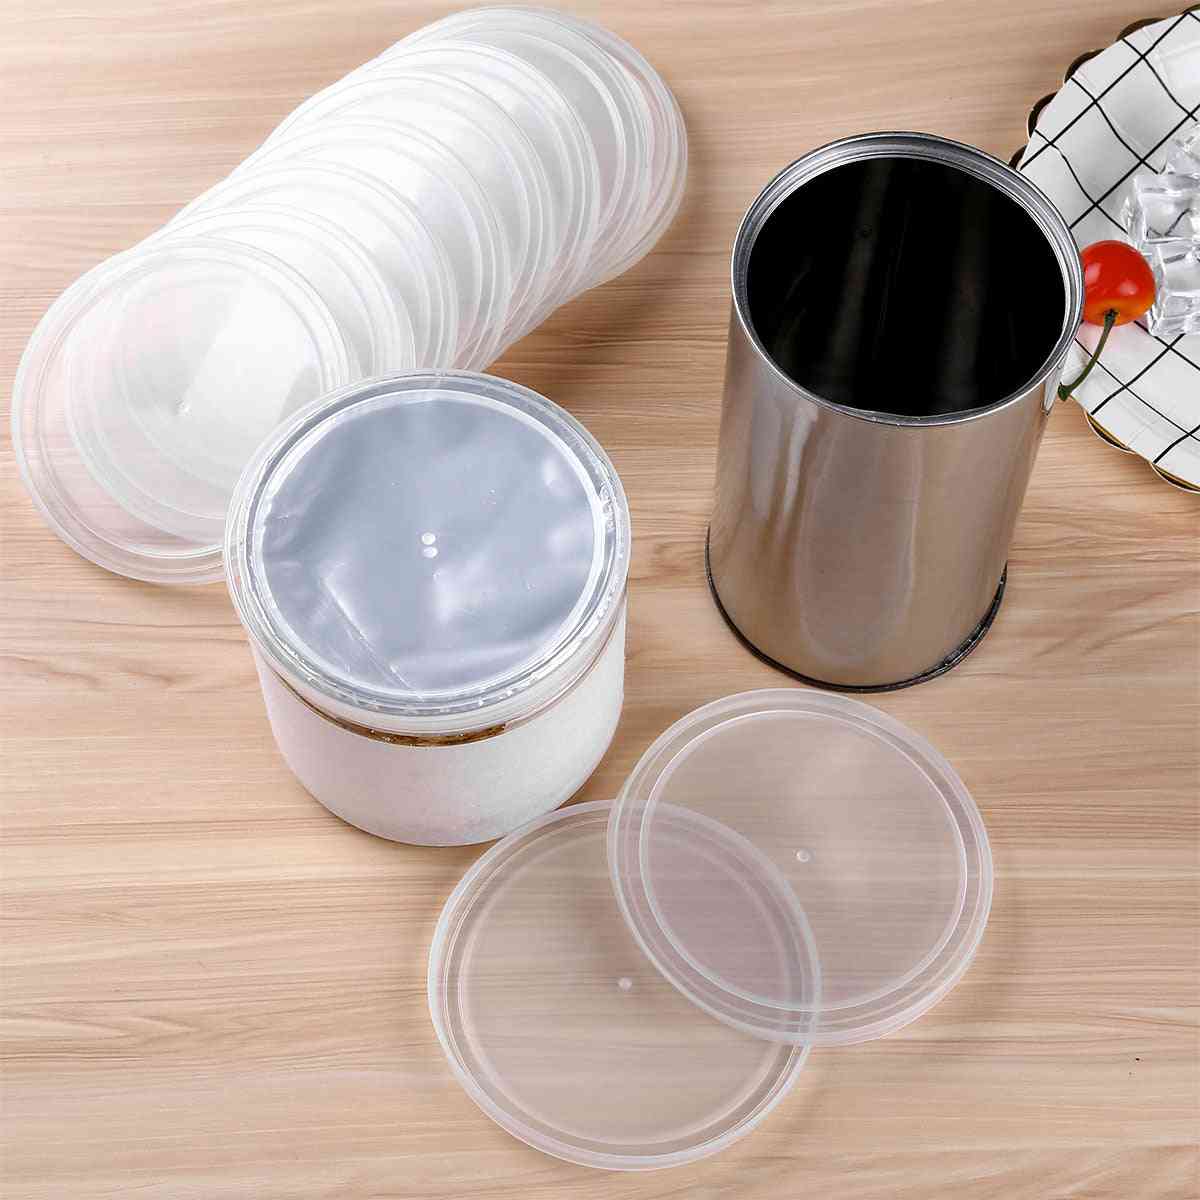 Reusable Bpa-free Can Covers Plastic Tight Seal Lids For Canned